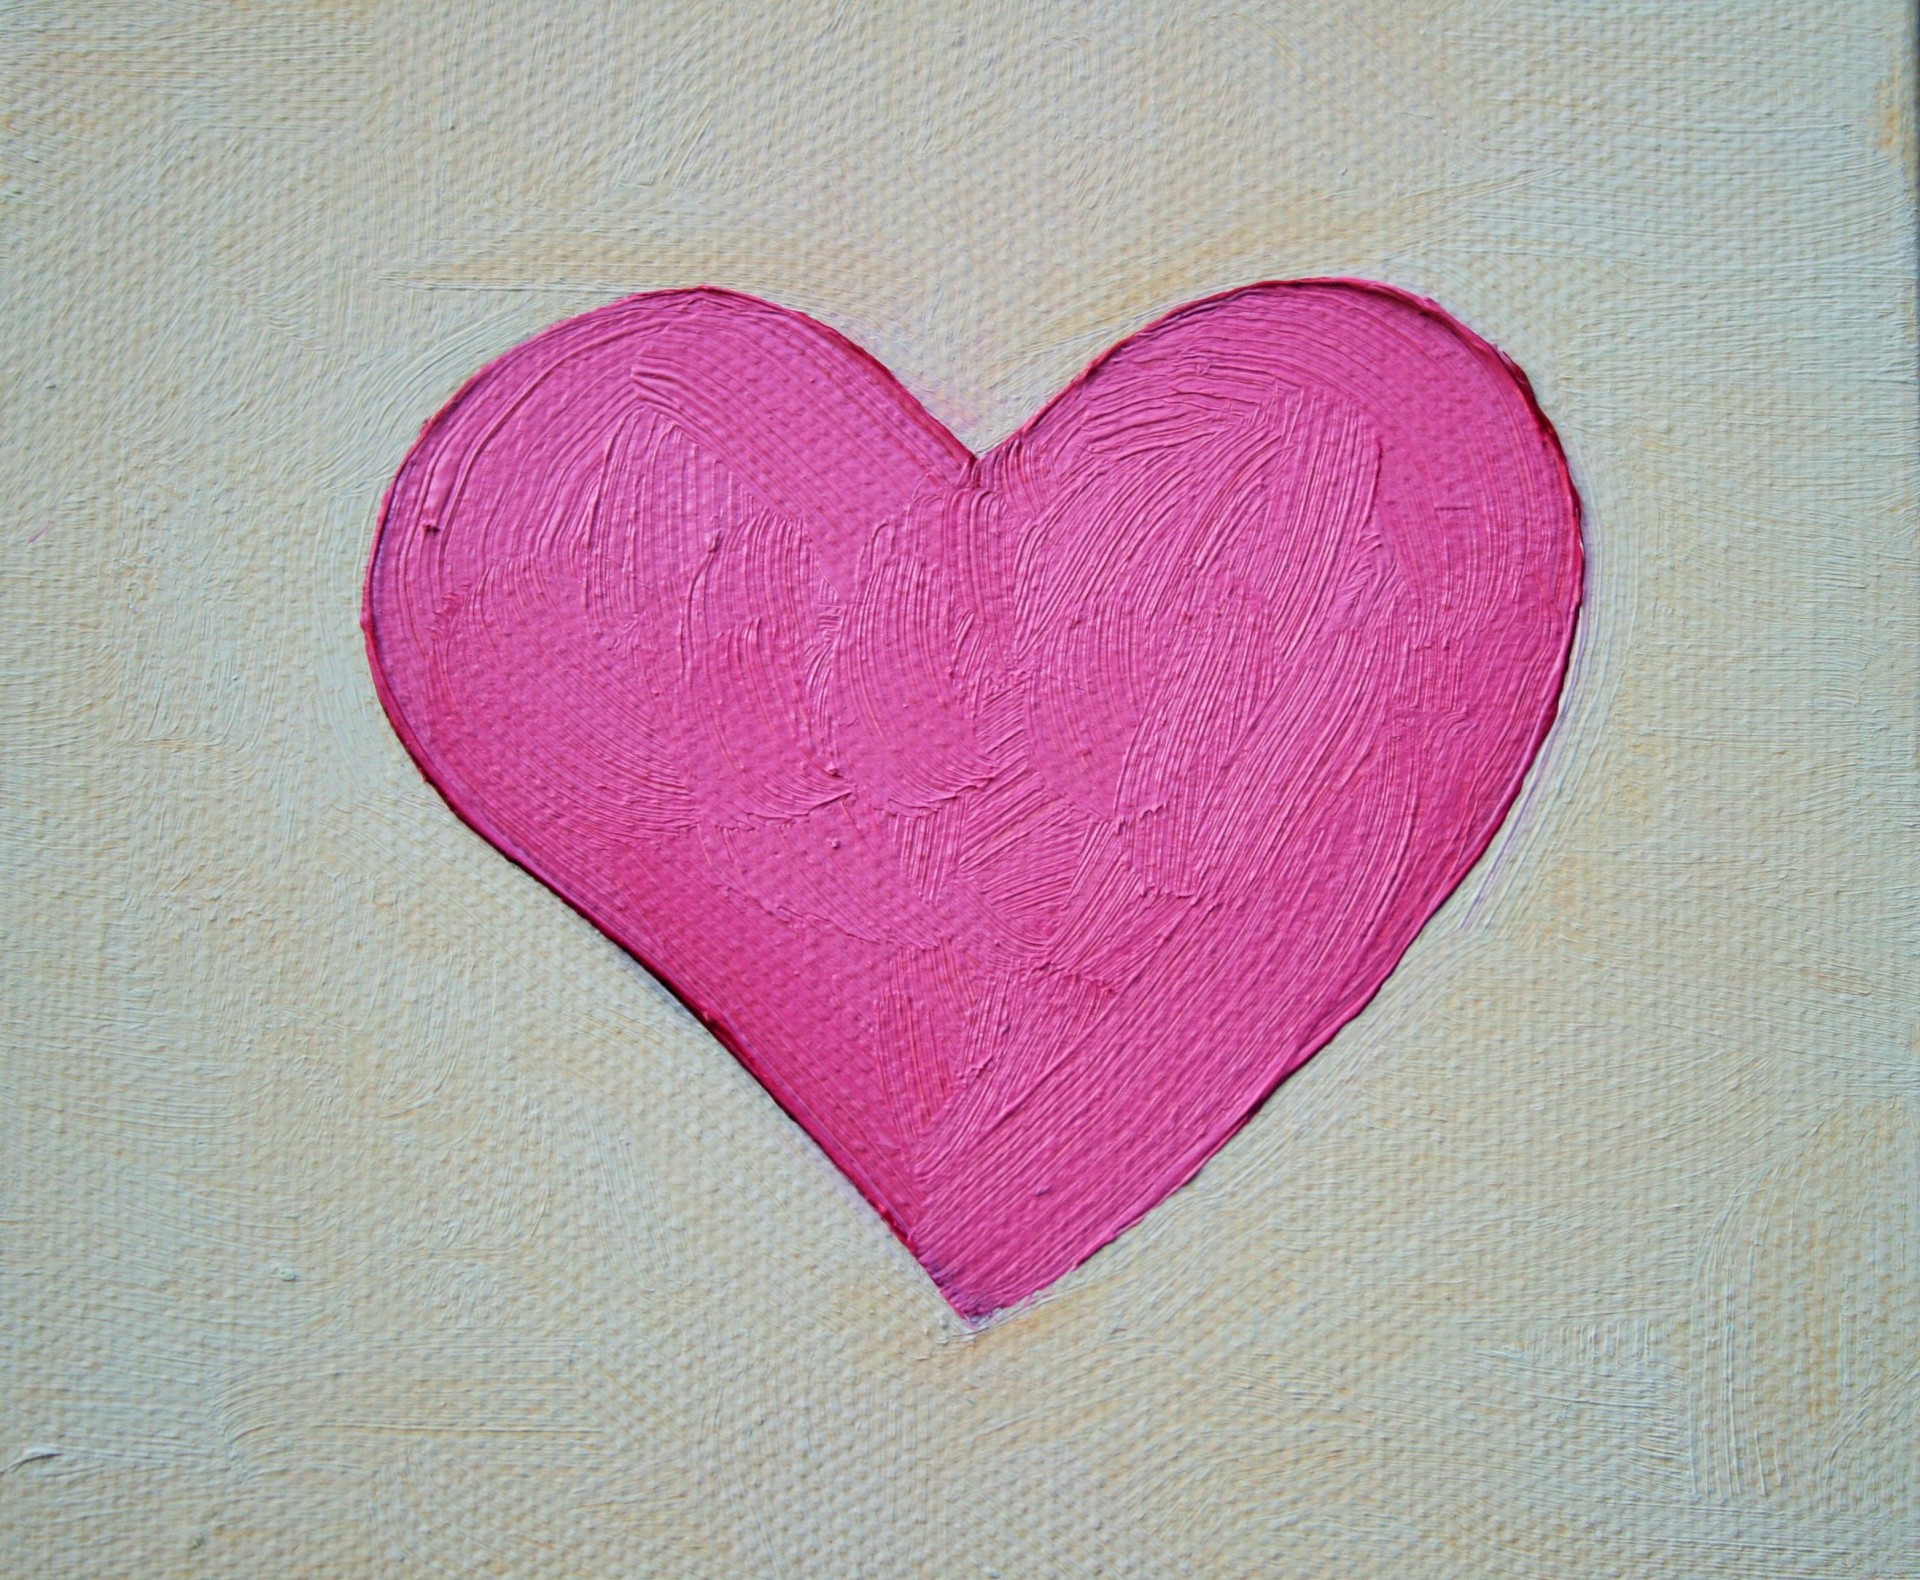 heart pink painted free photo